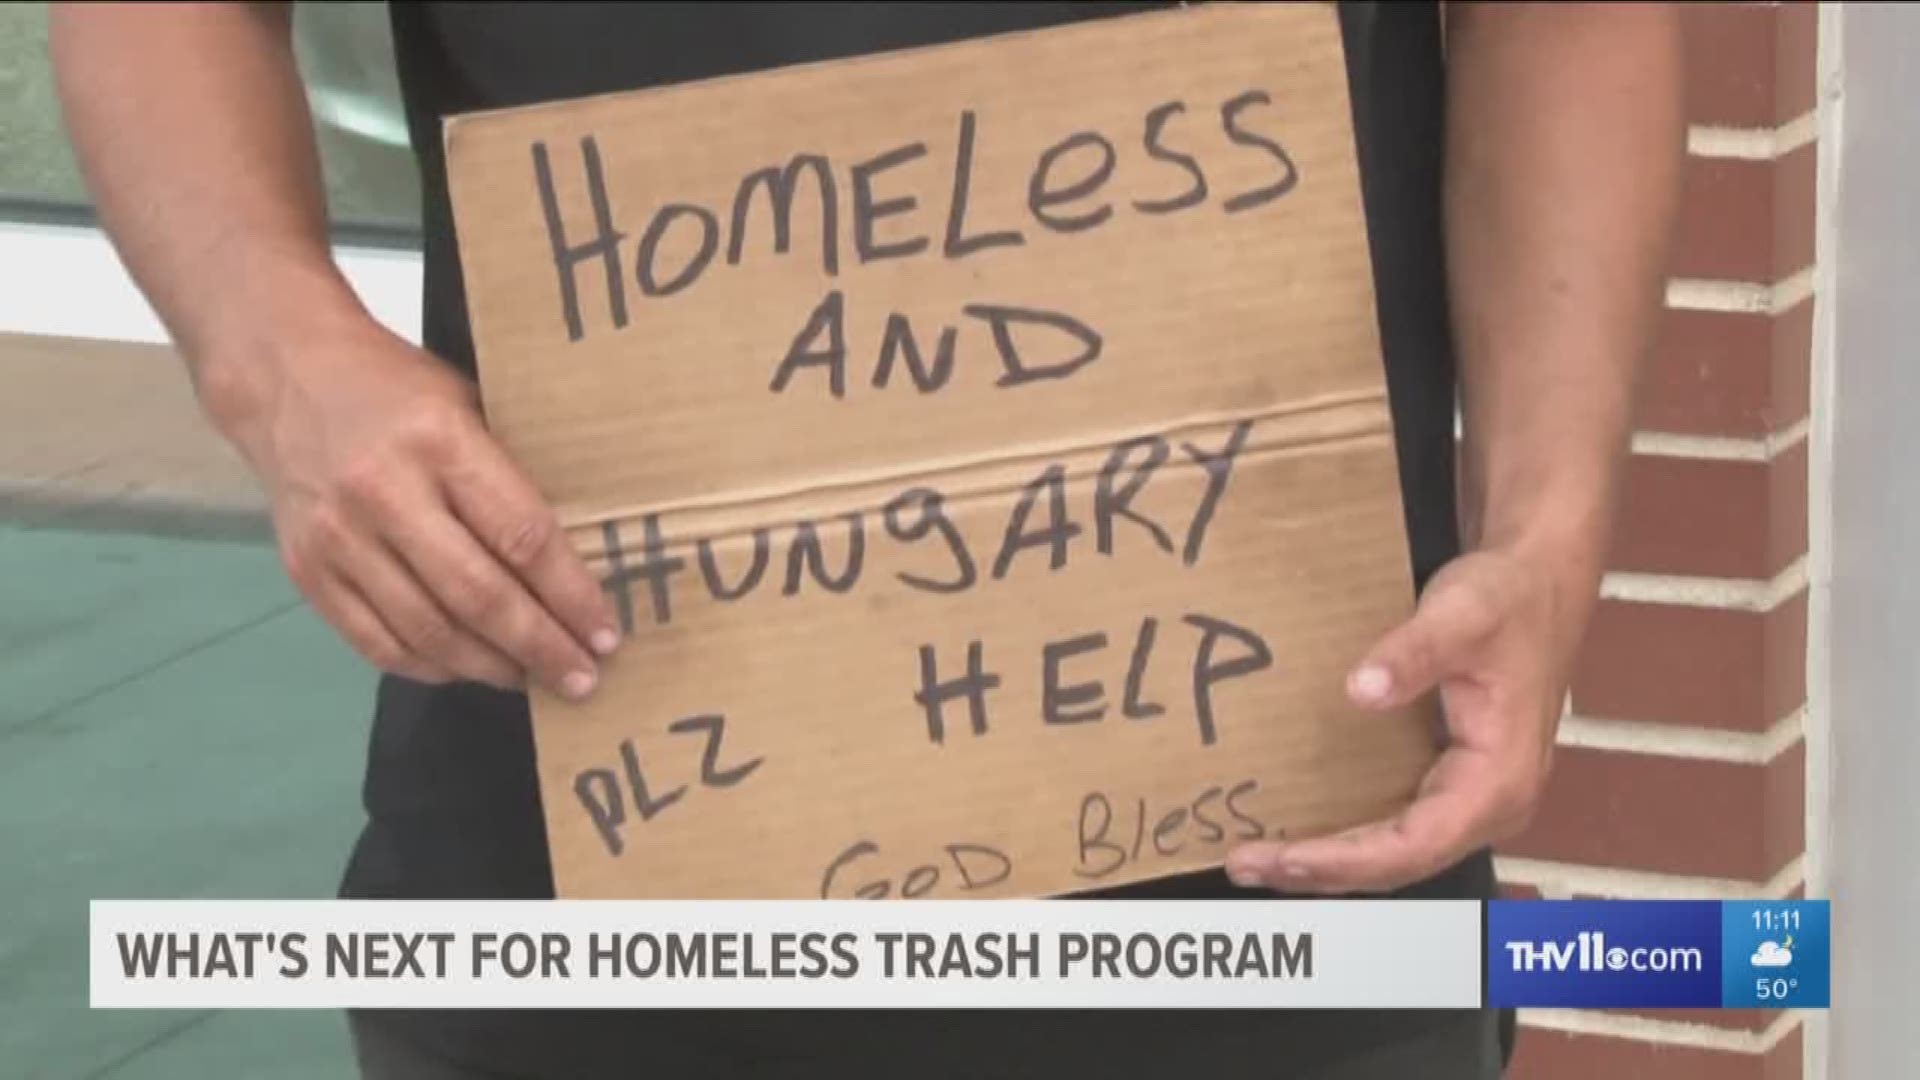 Starting in April, homeless people in Little Rock will be able to pick up trash and get paid minimum wage.